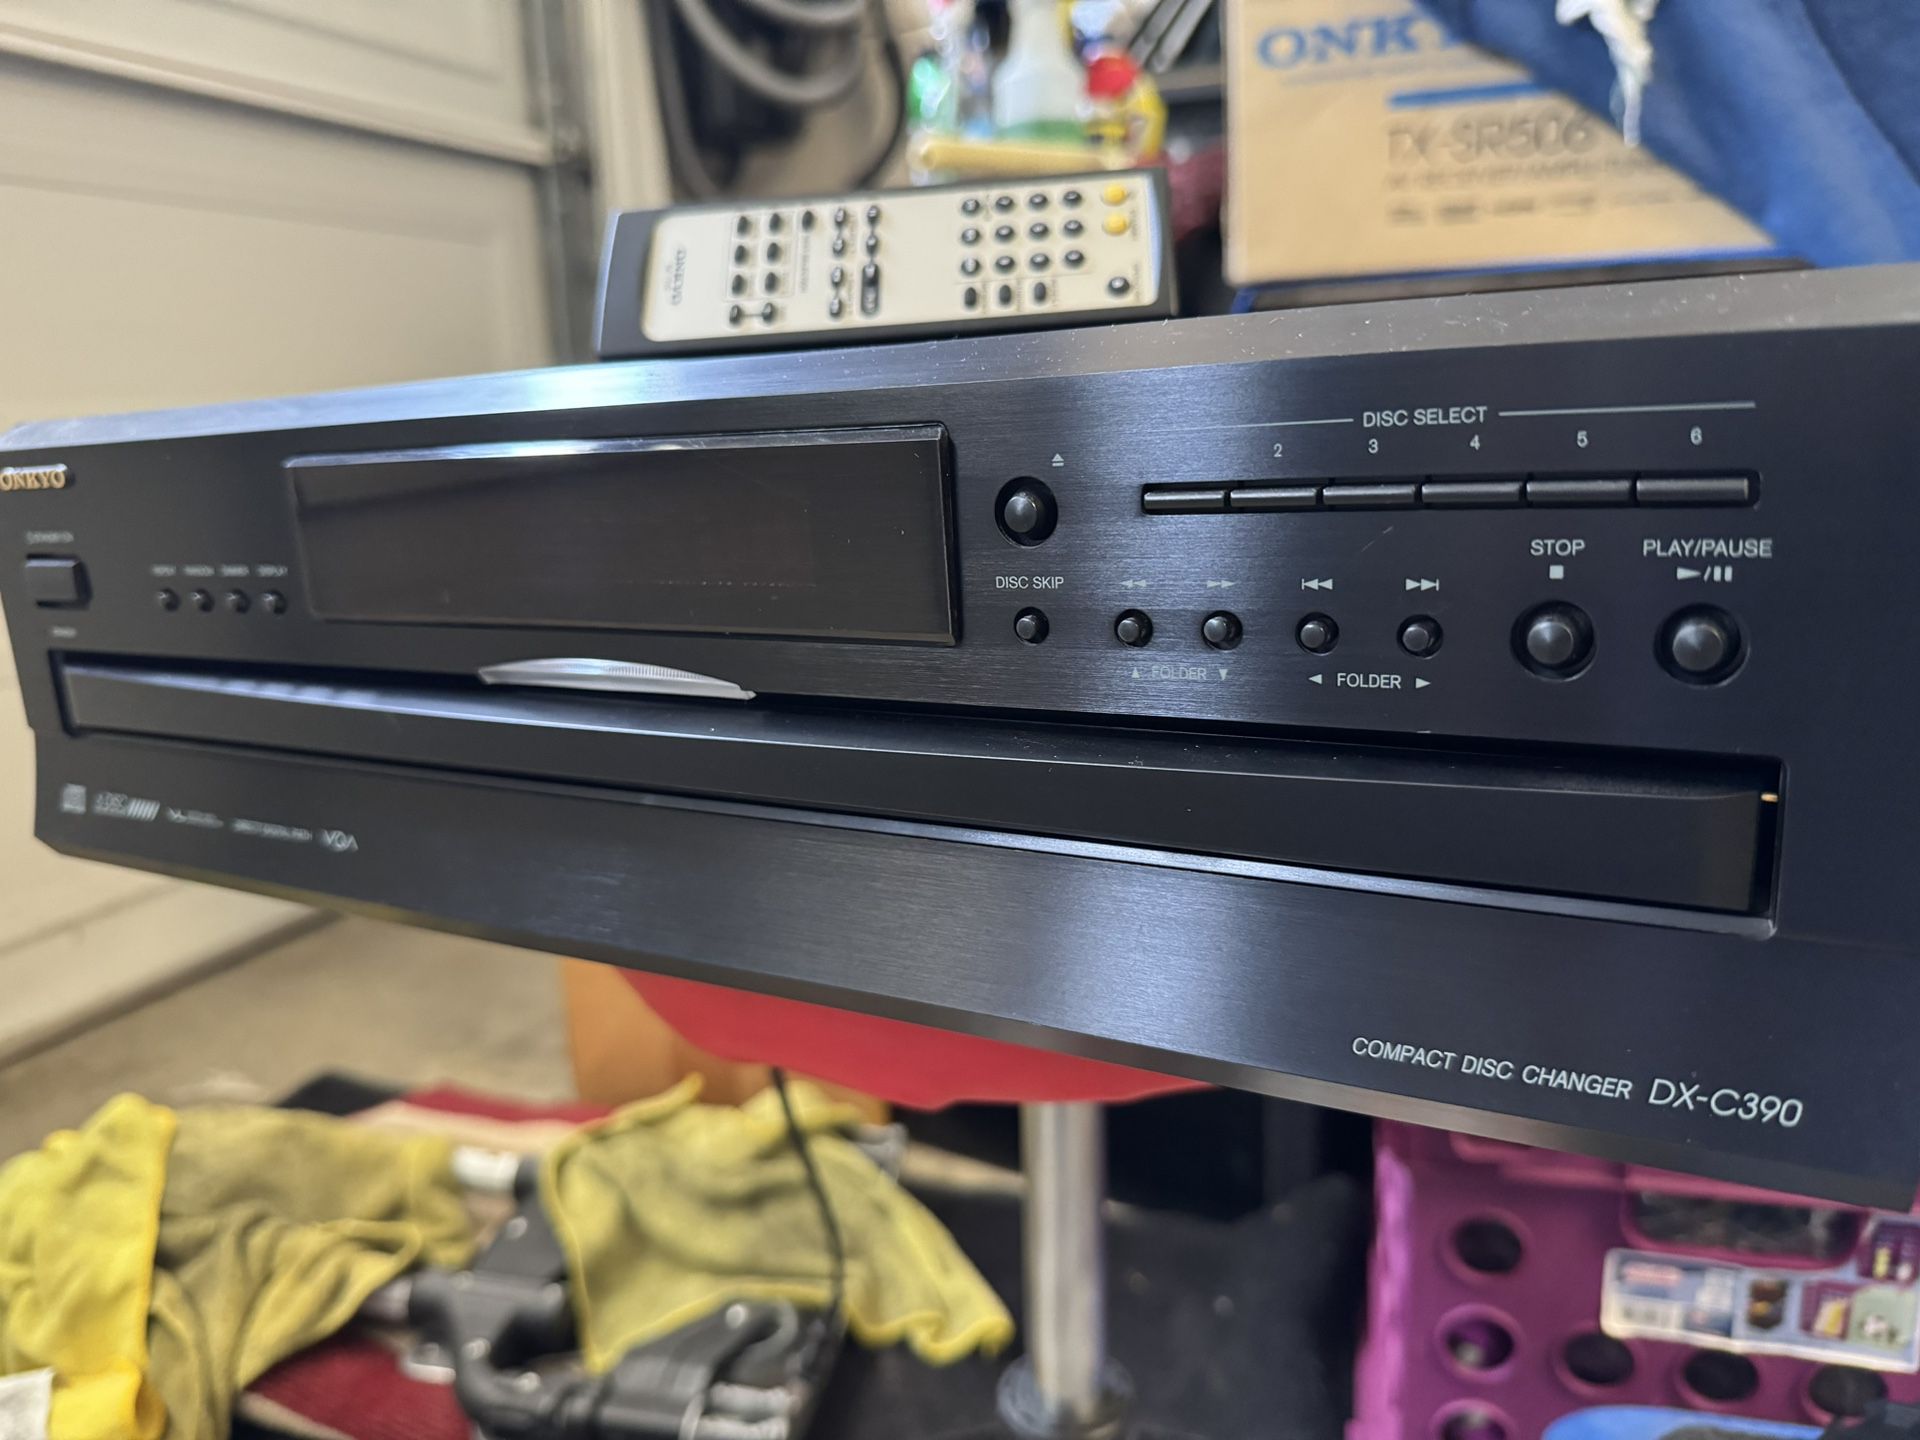 Onkyo 6-disc Carousel CD Changer With Remote. Can Demo